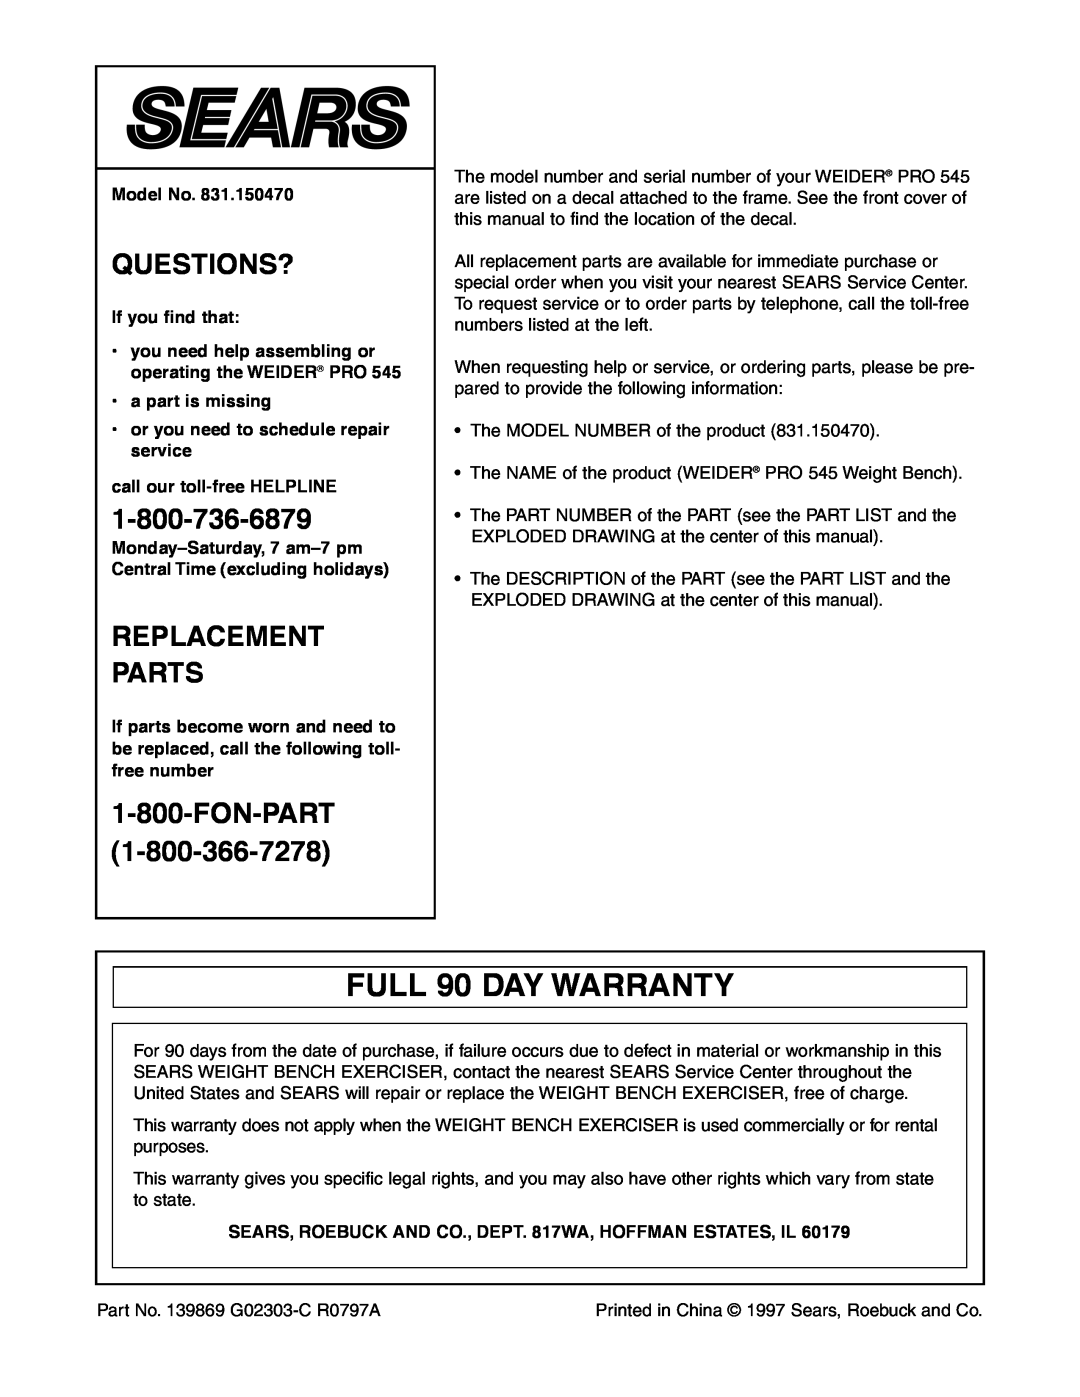 Weider 831.150470 user manual FULL 90 DAY WARRANTY, Questions?, Replacement Parts, Fon-Part 